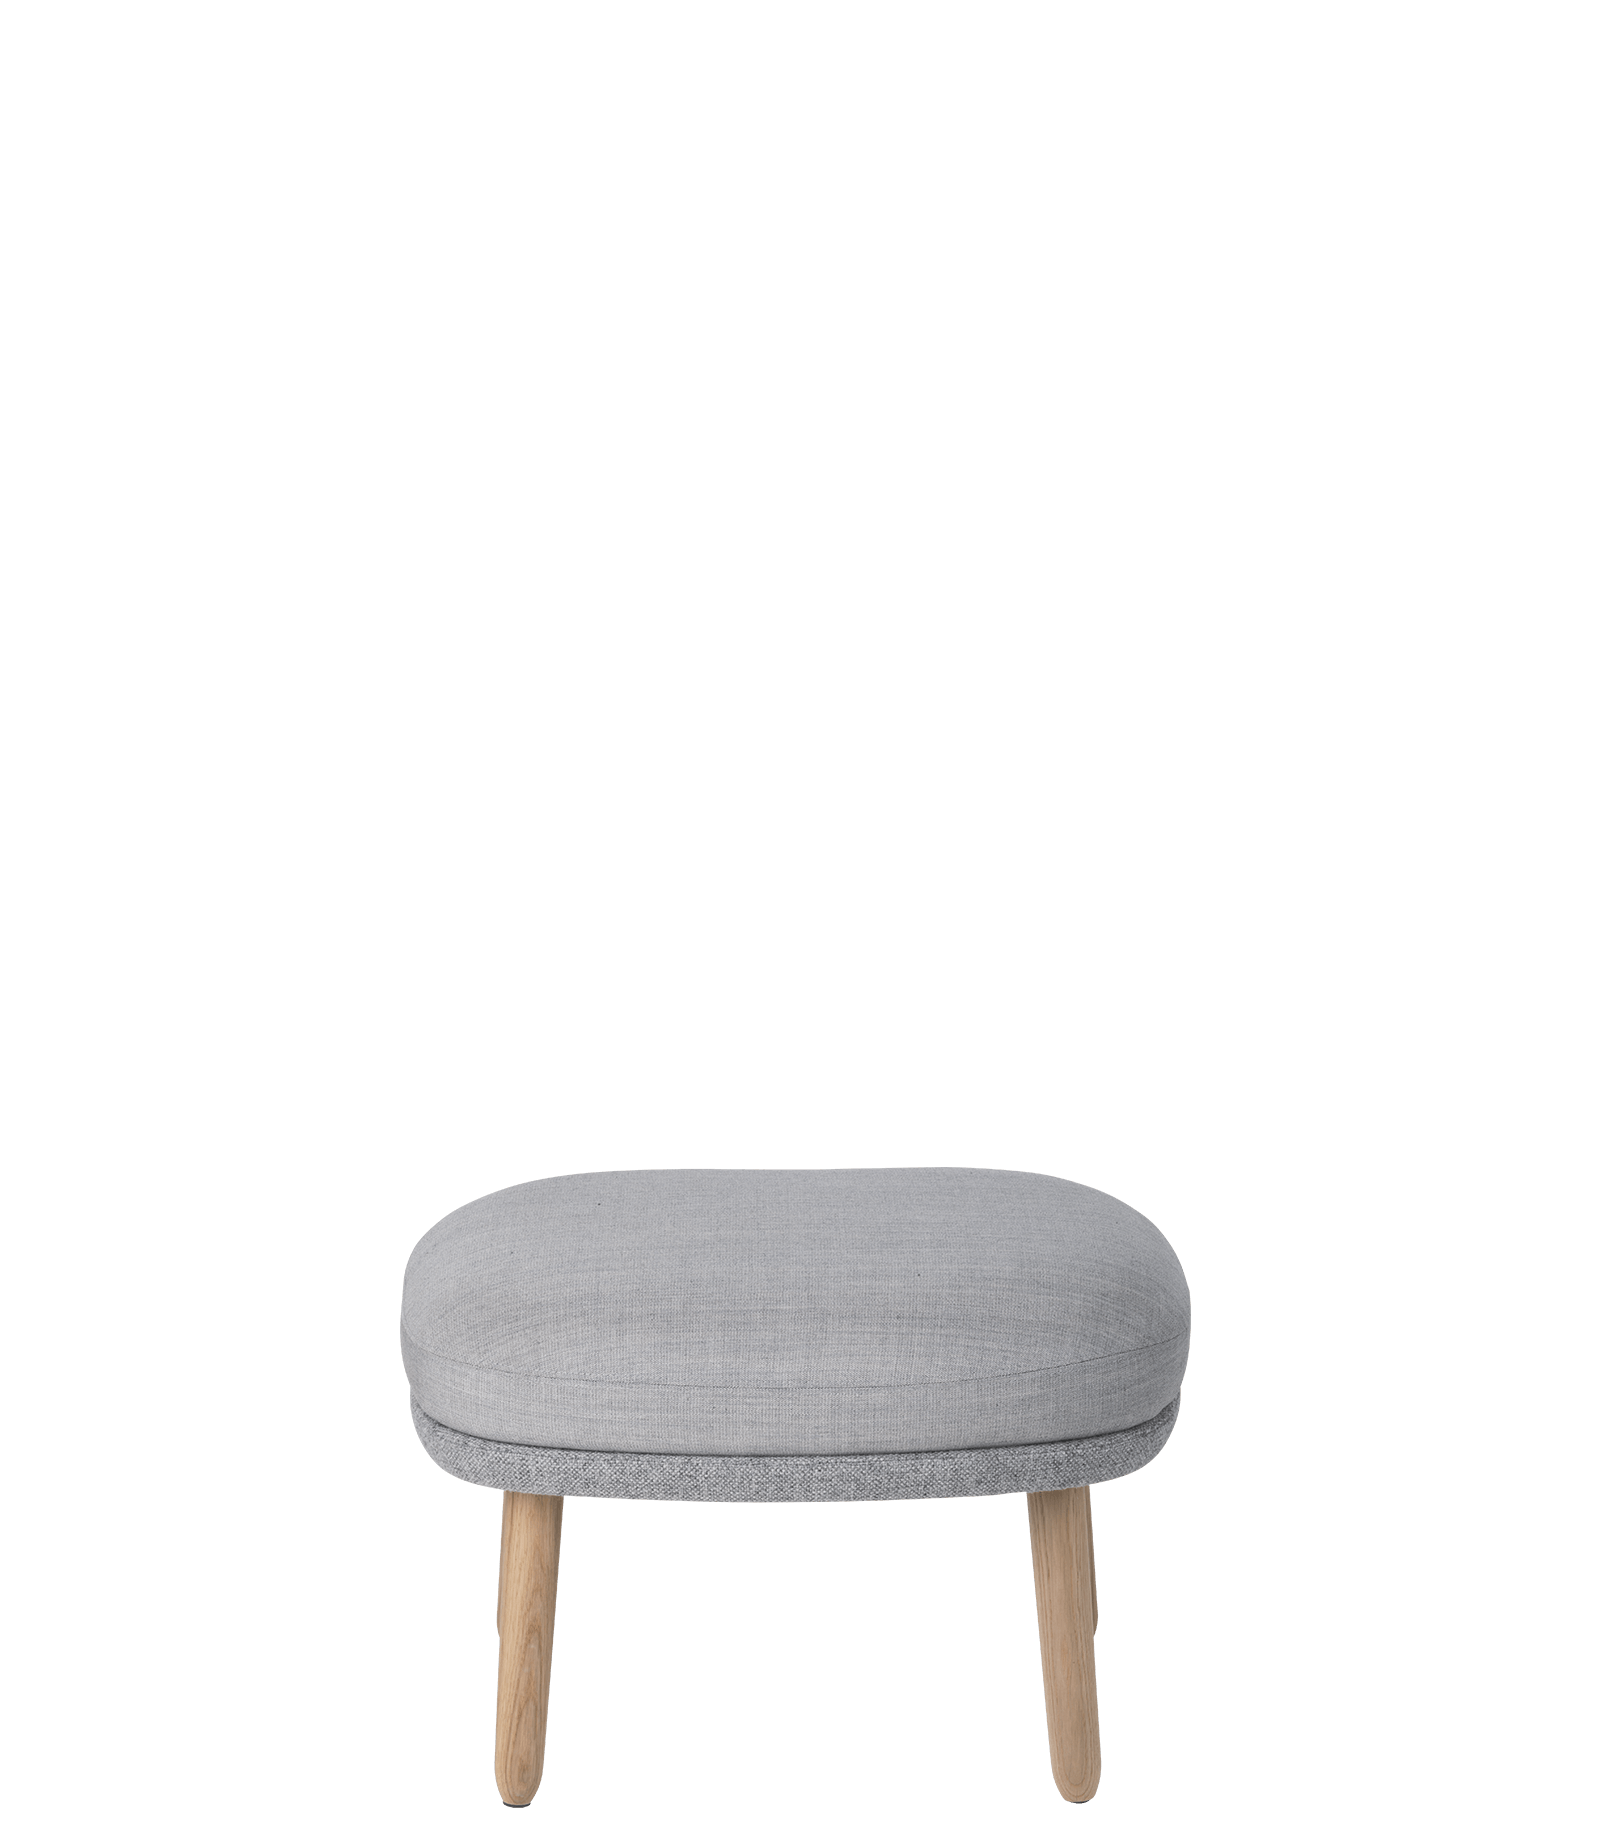 Footstool Picture Free Download Image PNG Image